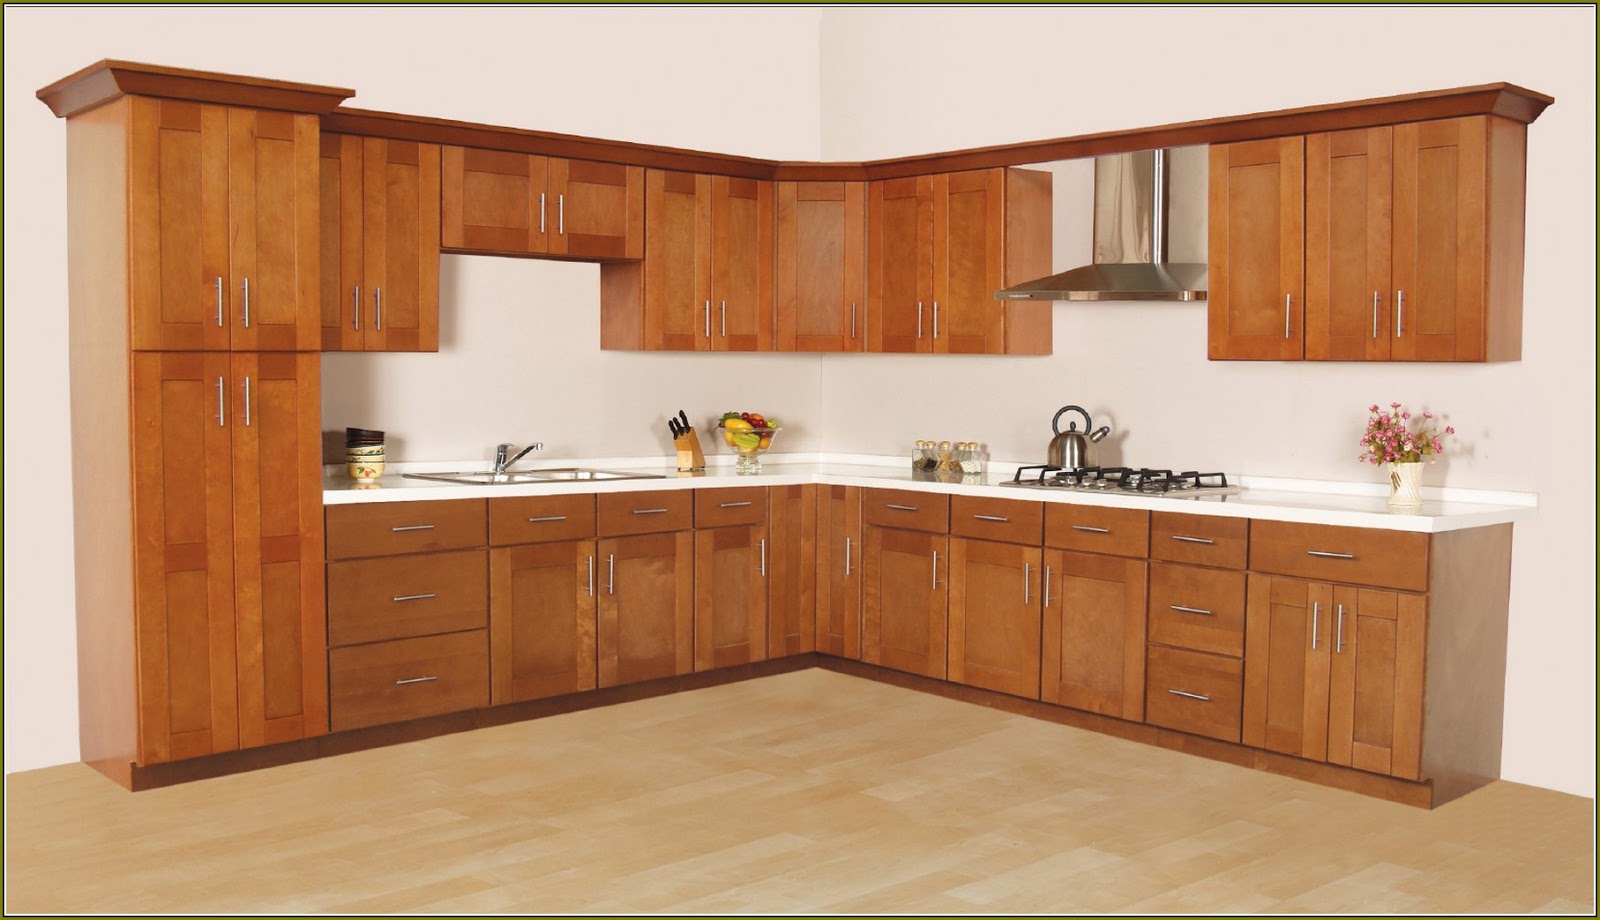 Tips For Cabinet Doors And Drawers How To Stain Unfinished Cabinets From Lowes Methods Of 2018